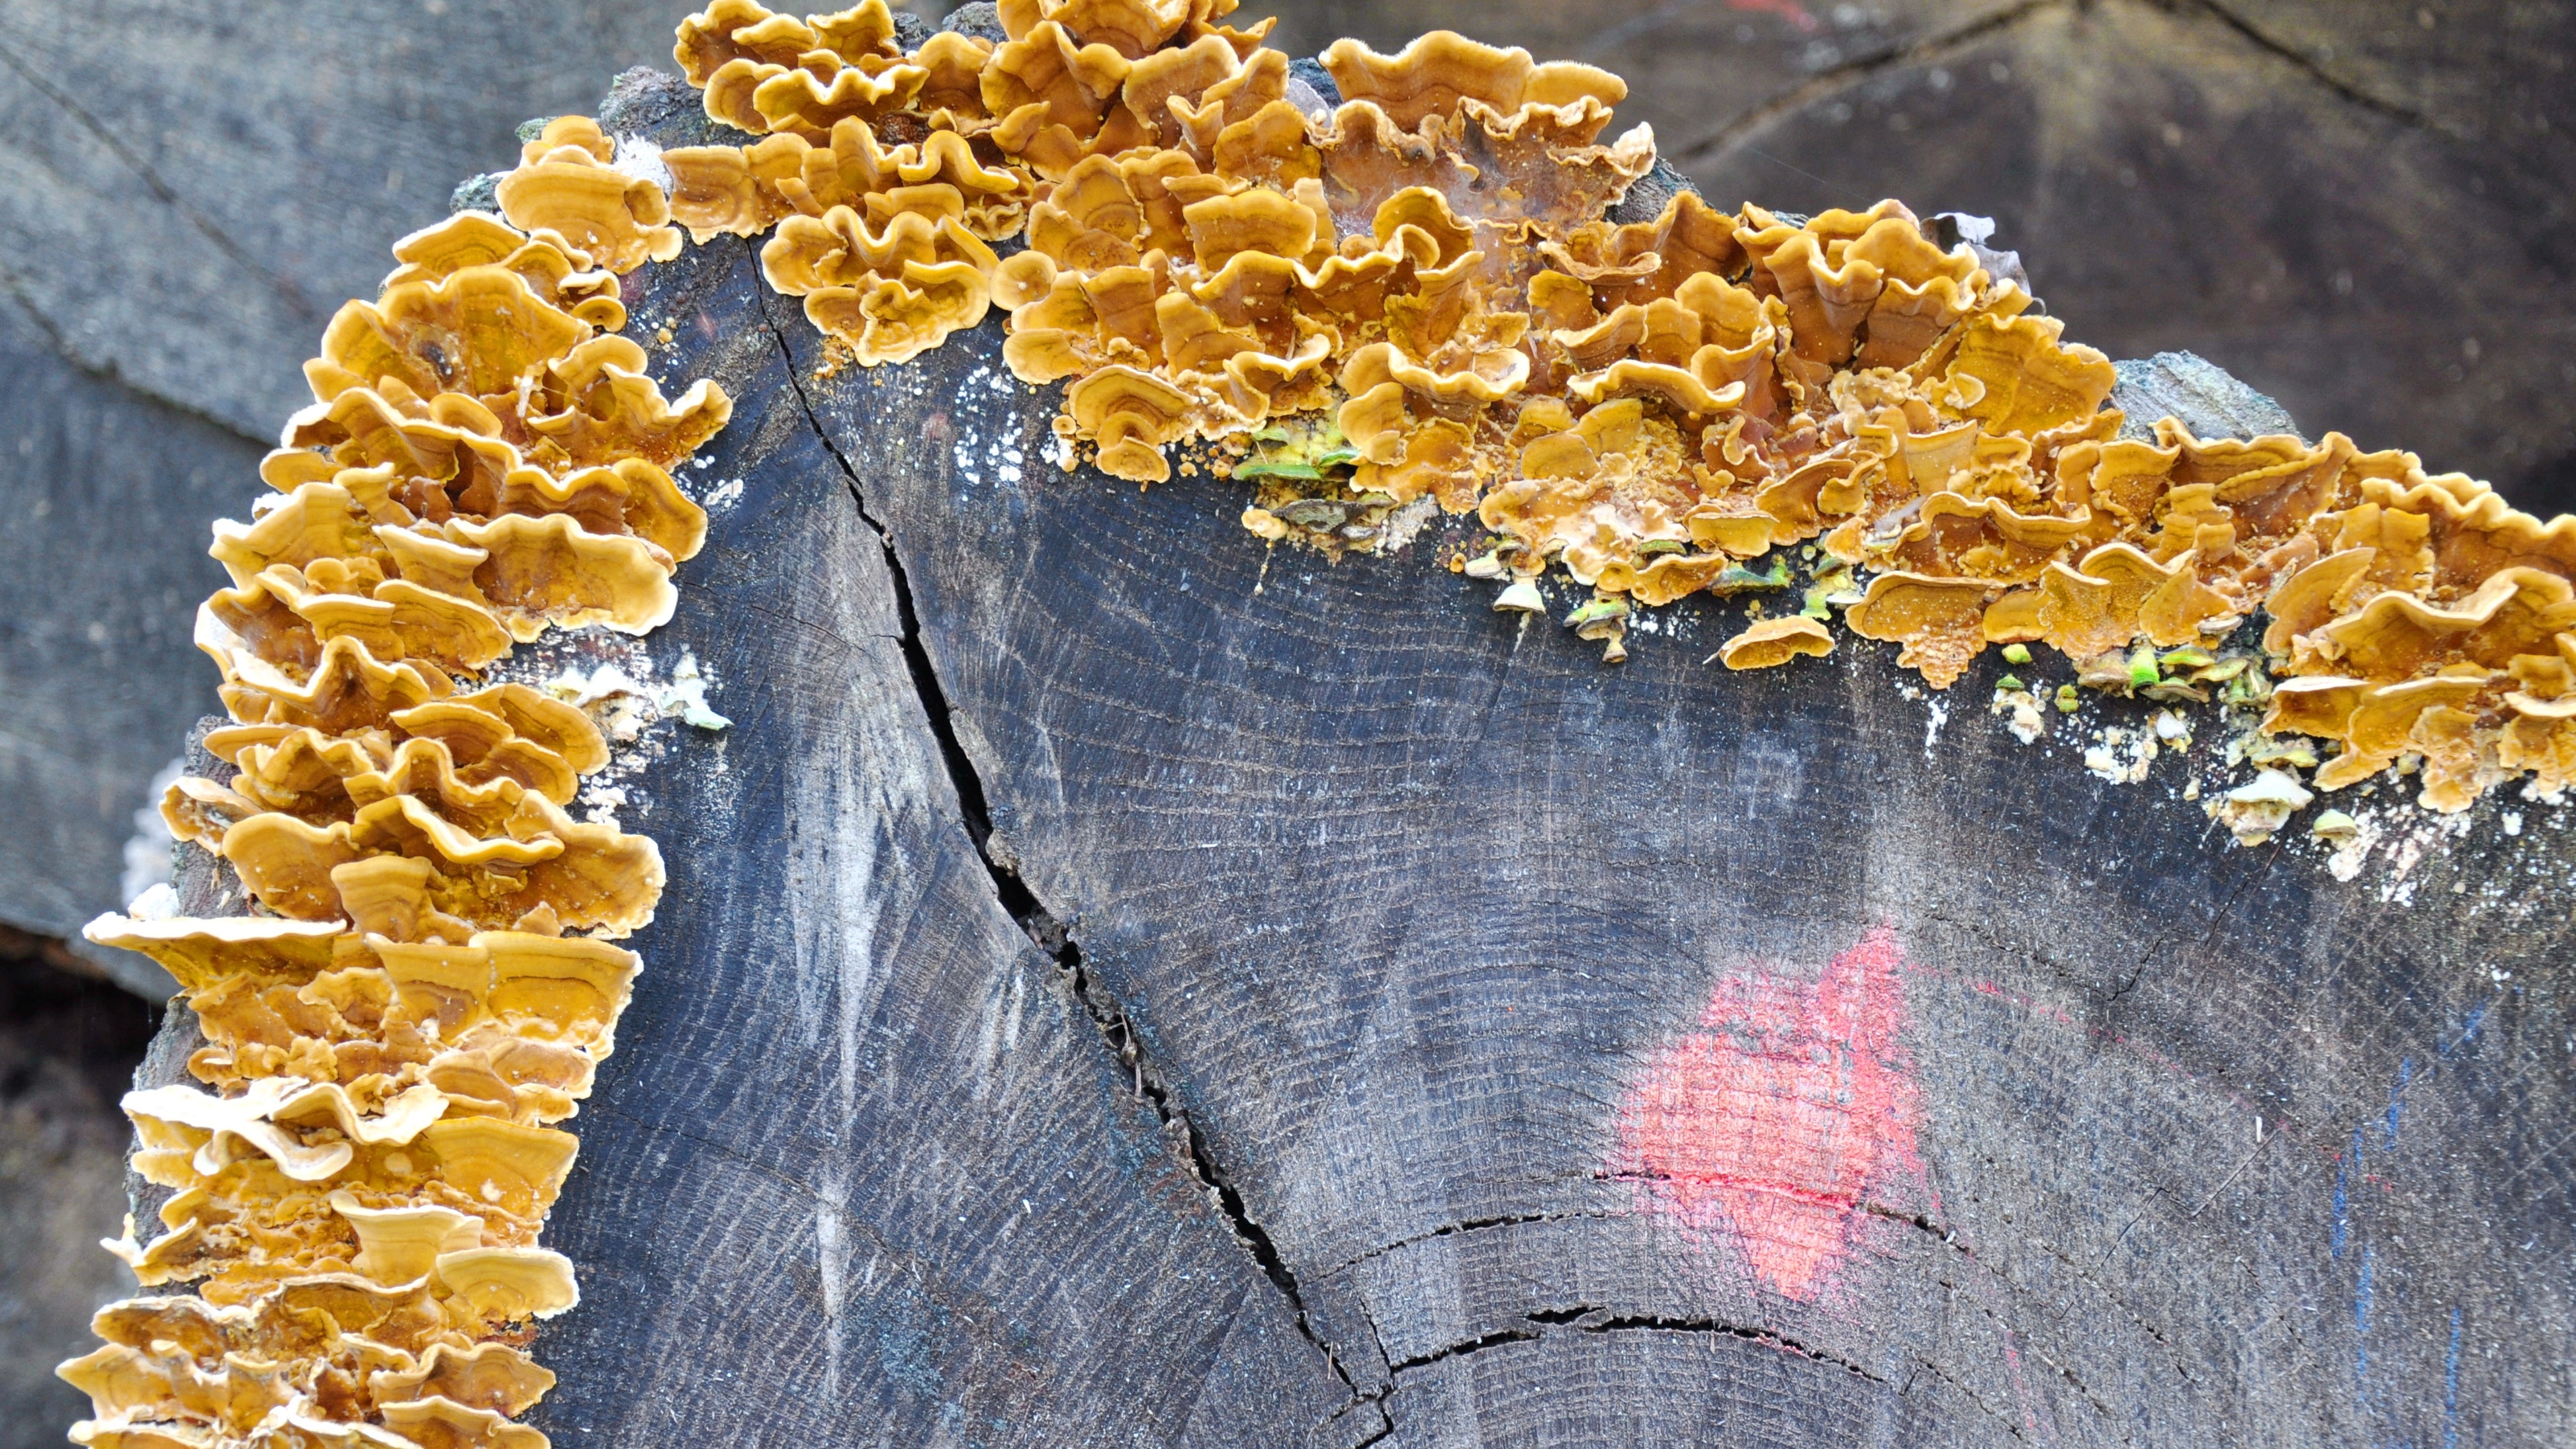 Tinder Fungus, Wood, Forest, close-up, yellow